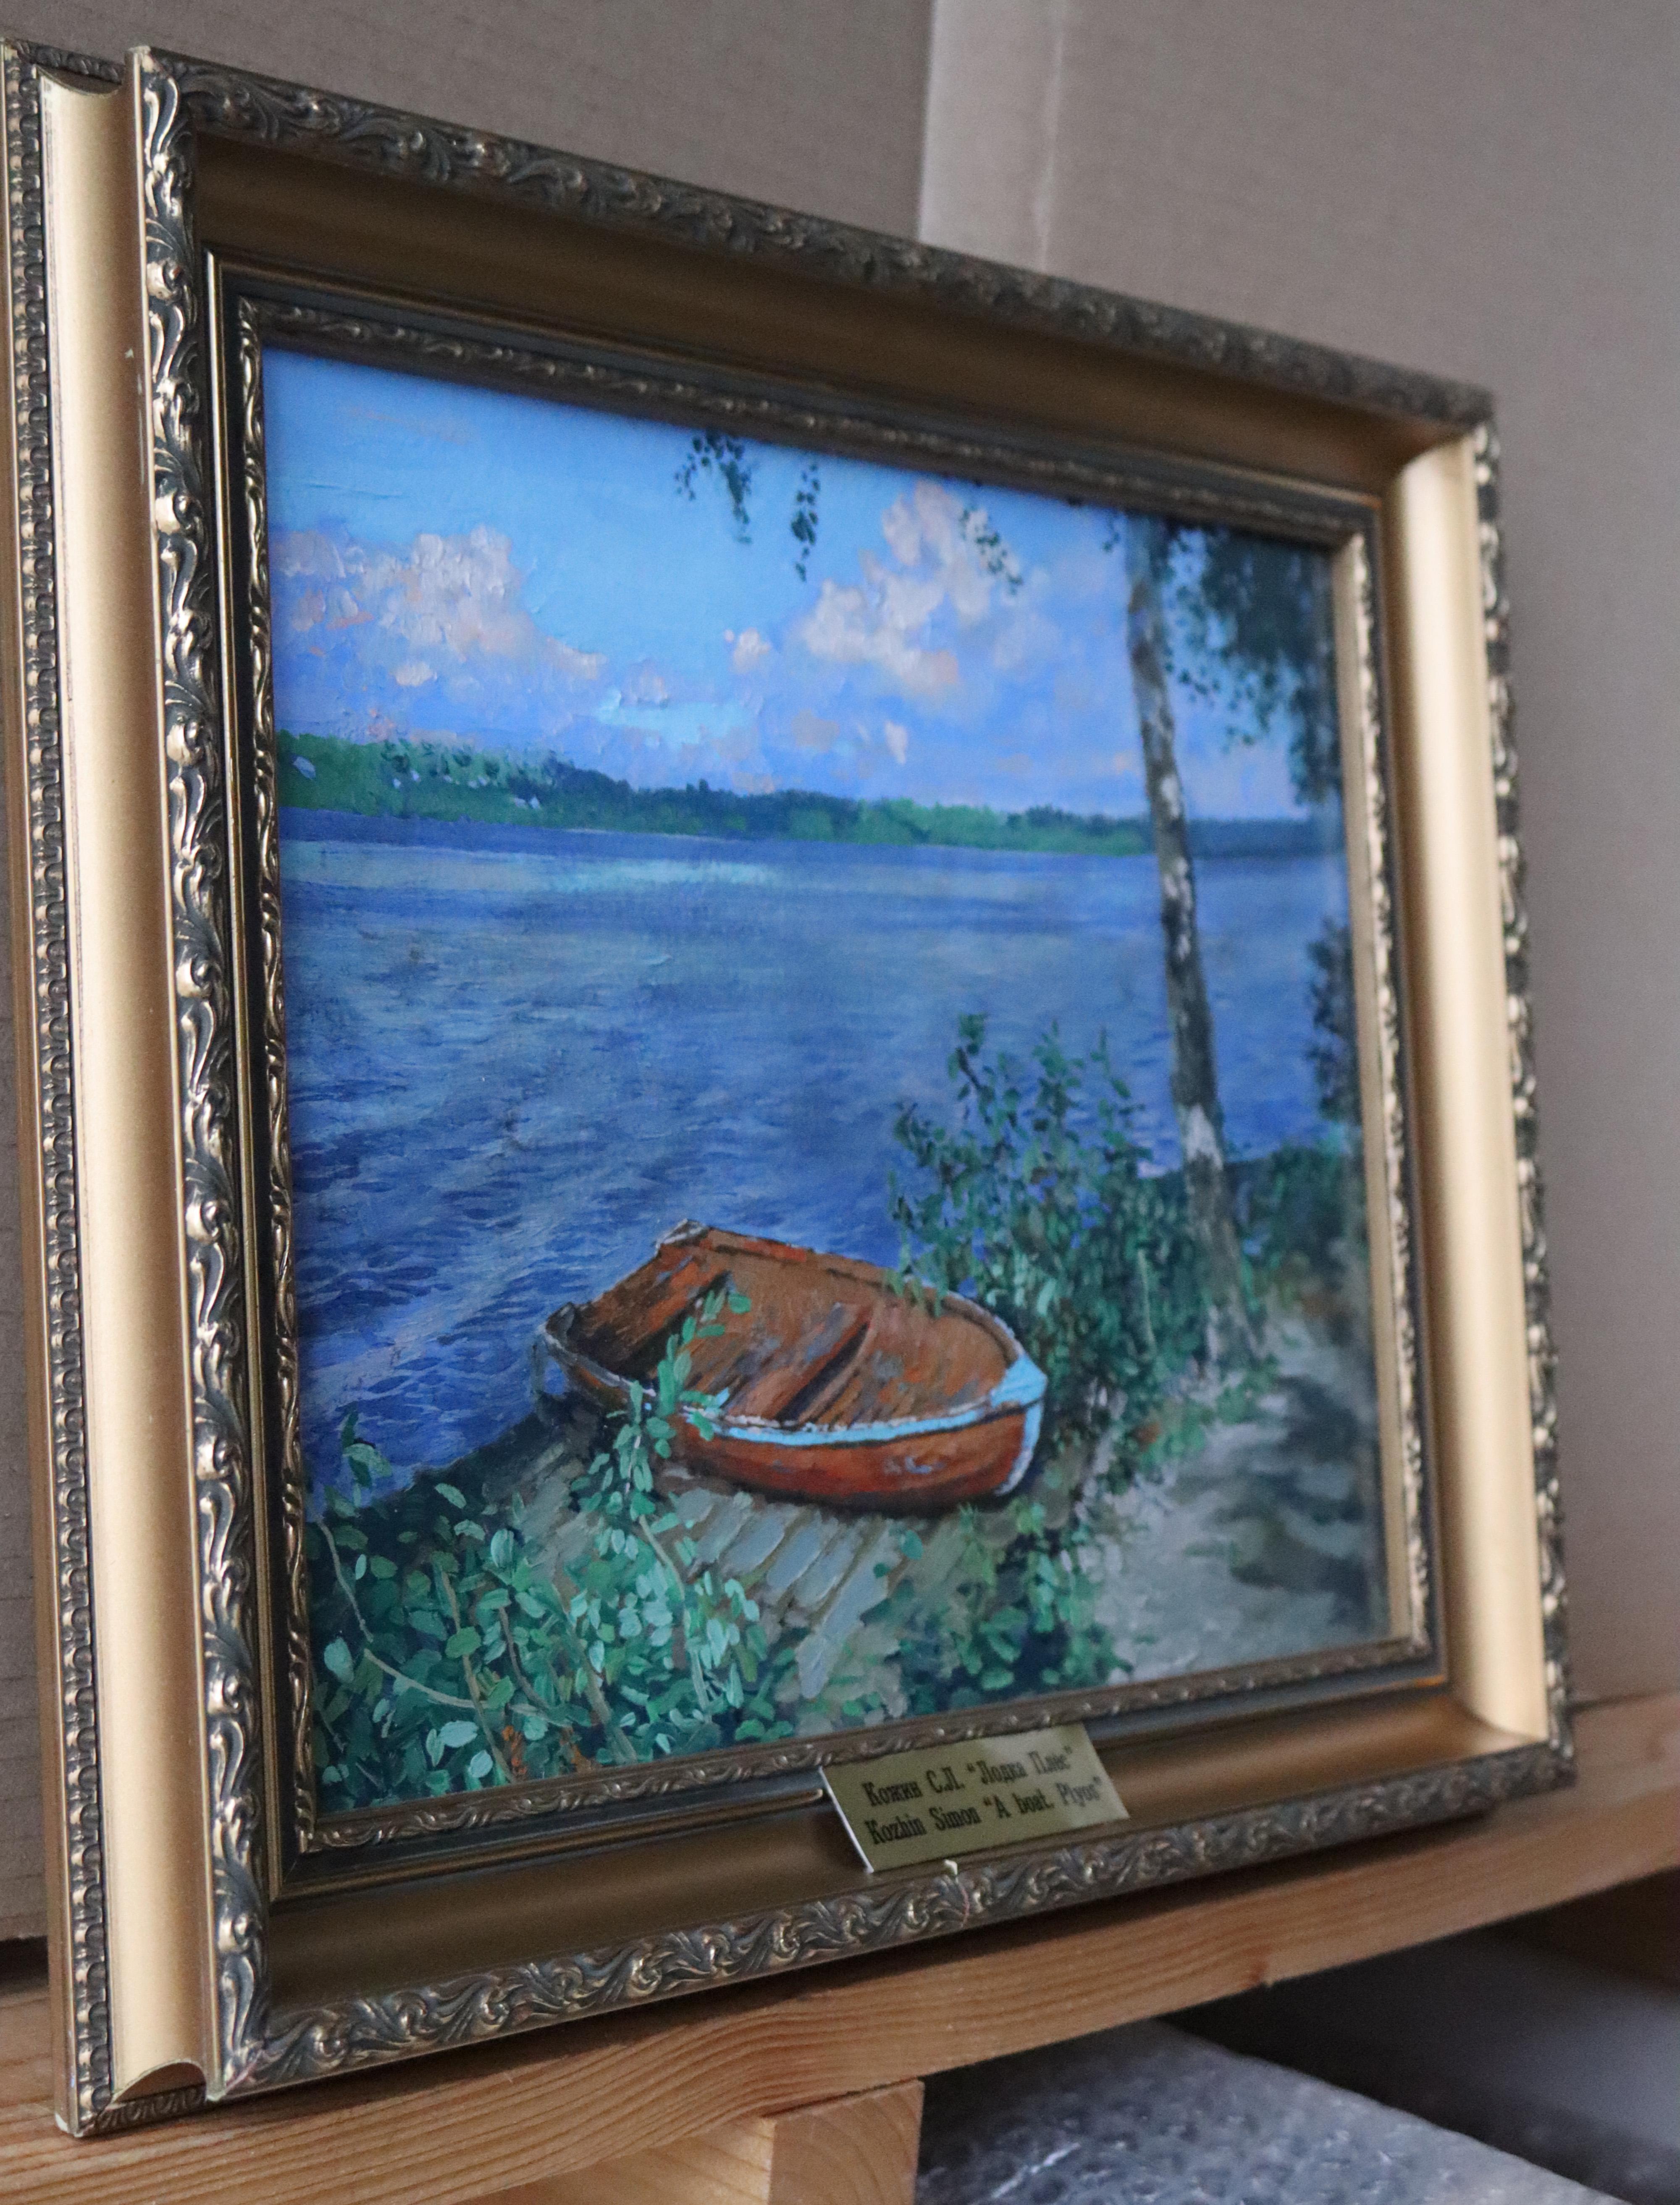 Having visited the Volga River again, the artist strives to come here again. These expanses and fresh wind, blue distances, fishermen and boats off the coast. This simple life of people far from the bustle of the city.